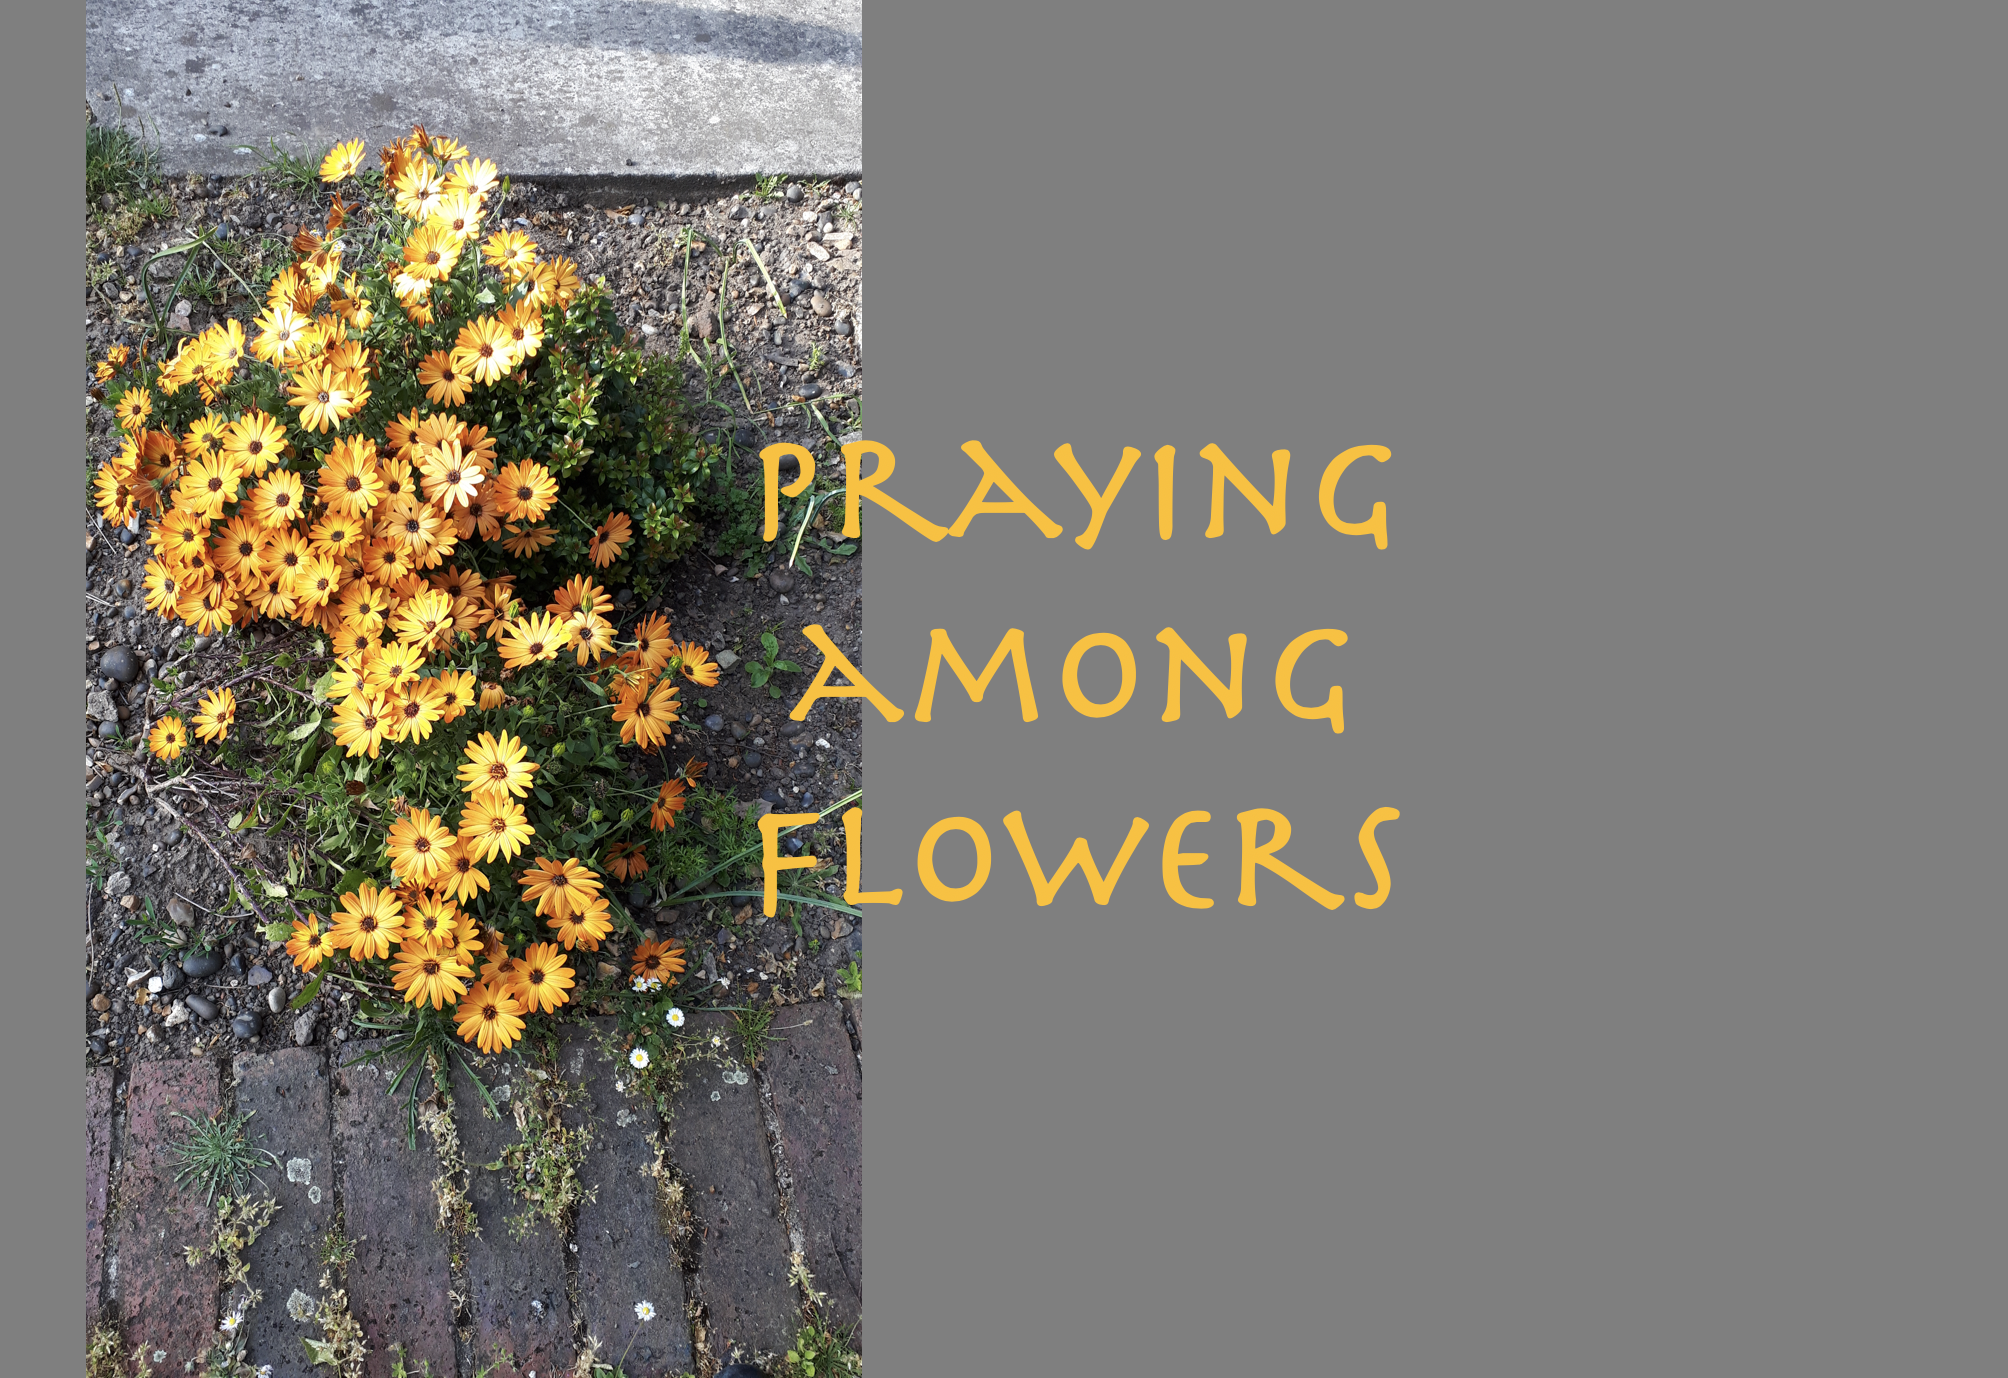 Think of Someone You Want to Pray For – Today’s Prayer